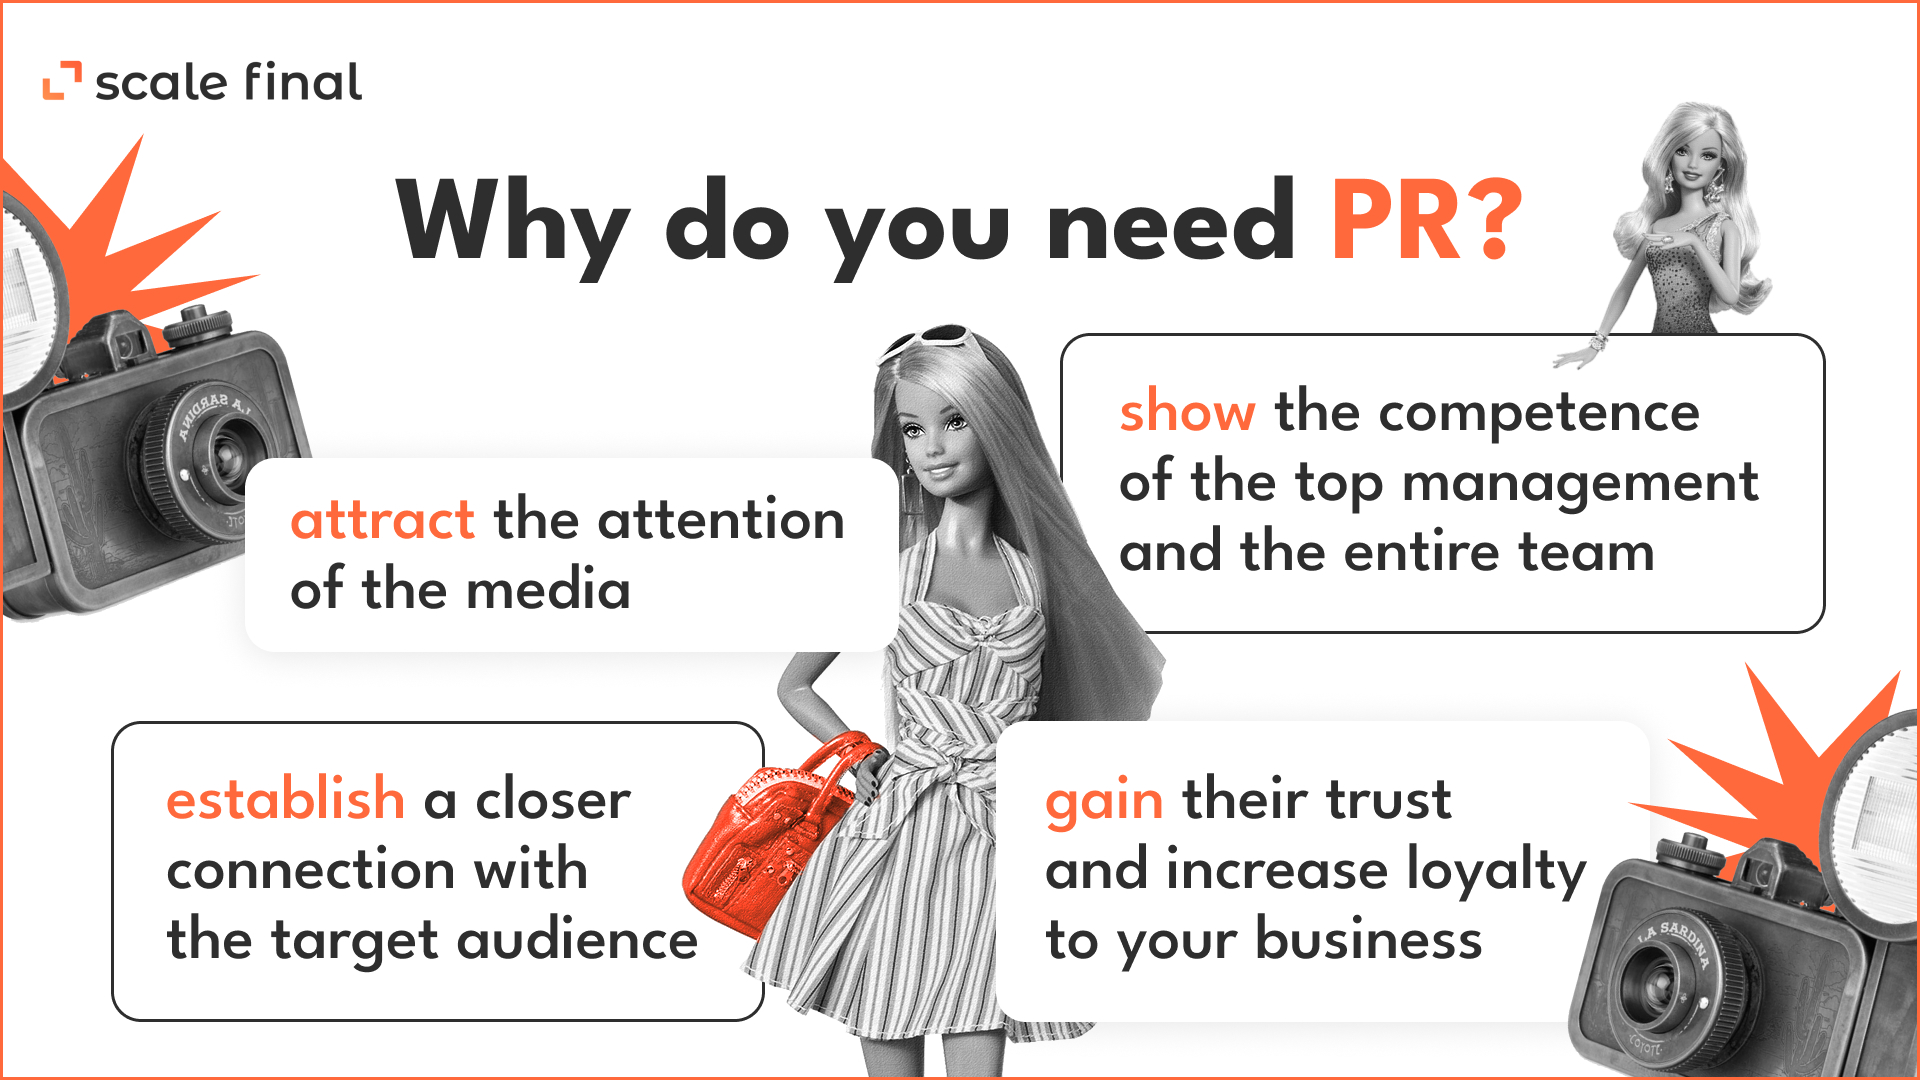 Why do you need PR?attract the attention of the mediashow the competence of the top management and the entire team;establish a closer connection with the target audiencegain their trust and increase loyalty to your business.